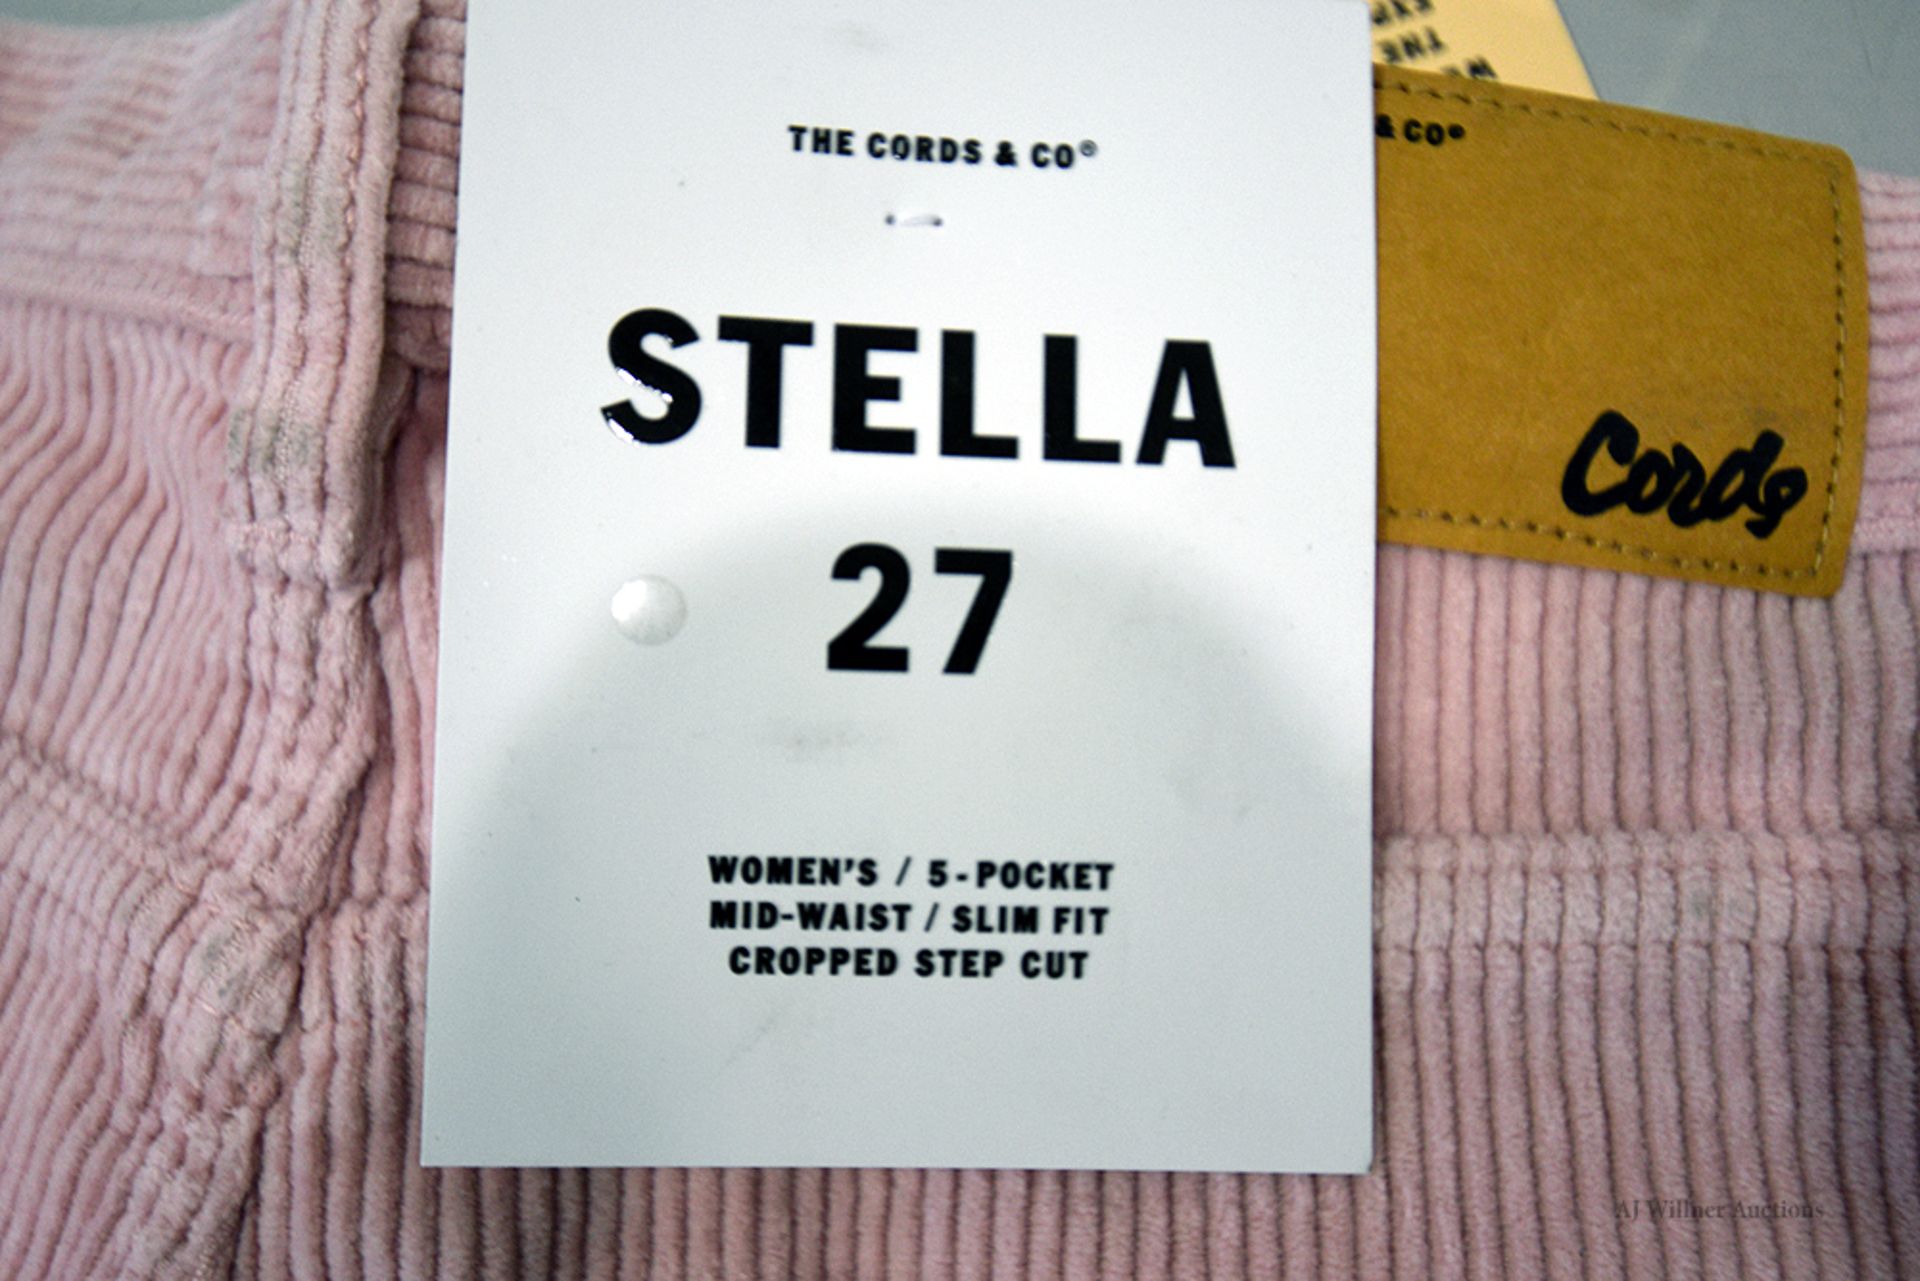 The Cords & Co. "Stella" Womens/ Mid Waist/ Slim Fit/ Cropped Pants MSRP $150 - Image 4 of 5